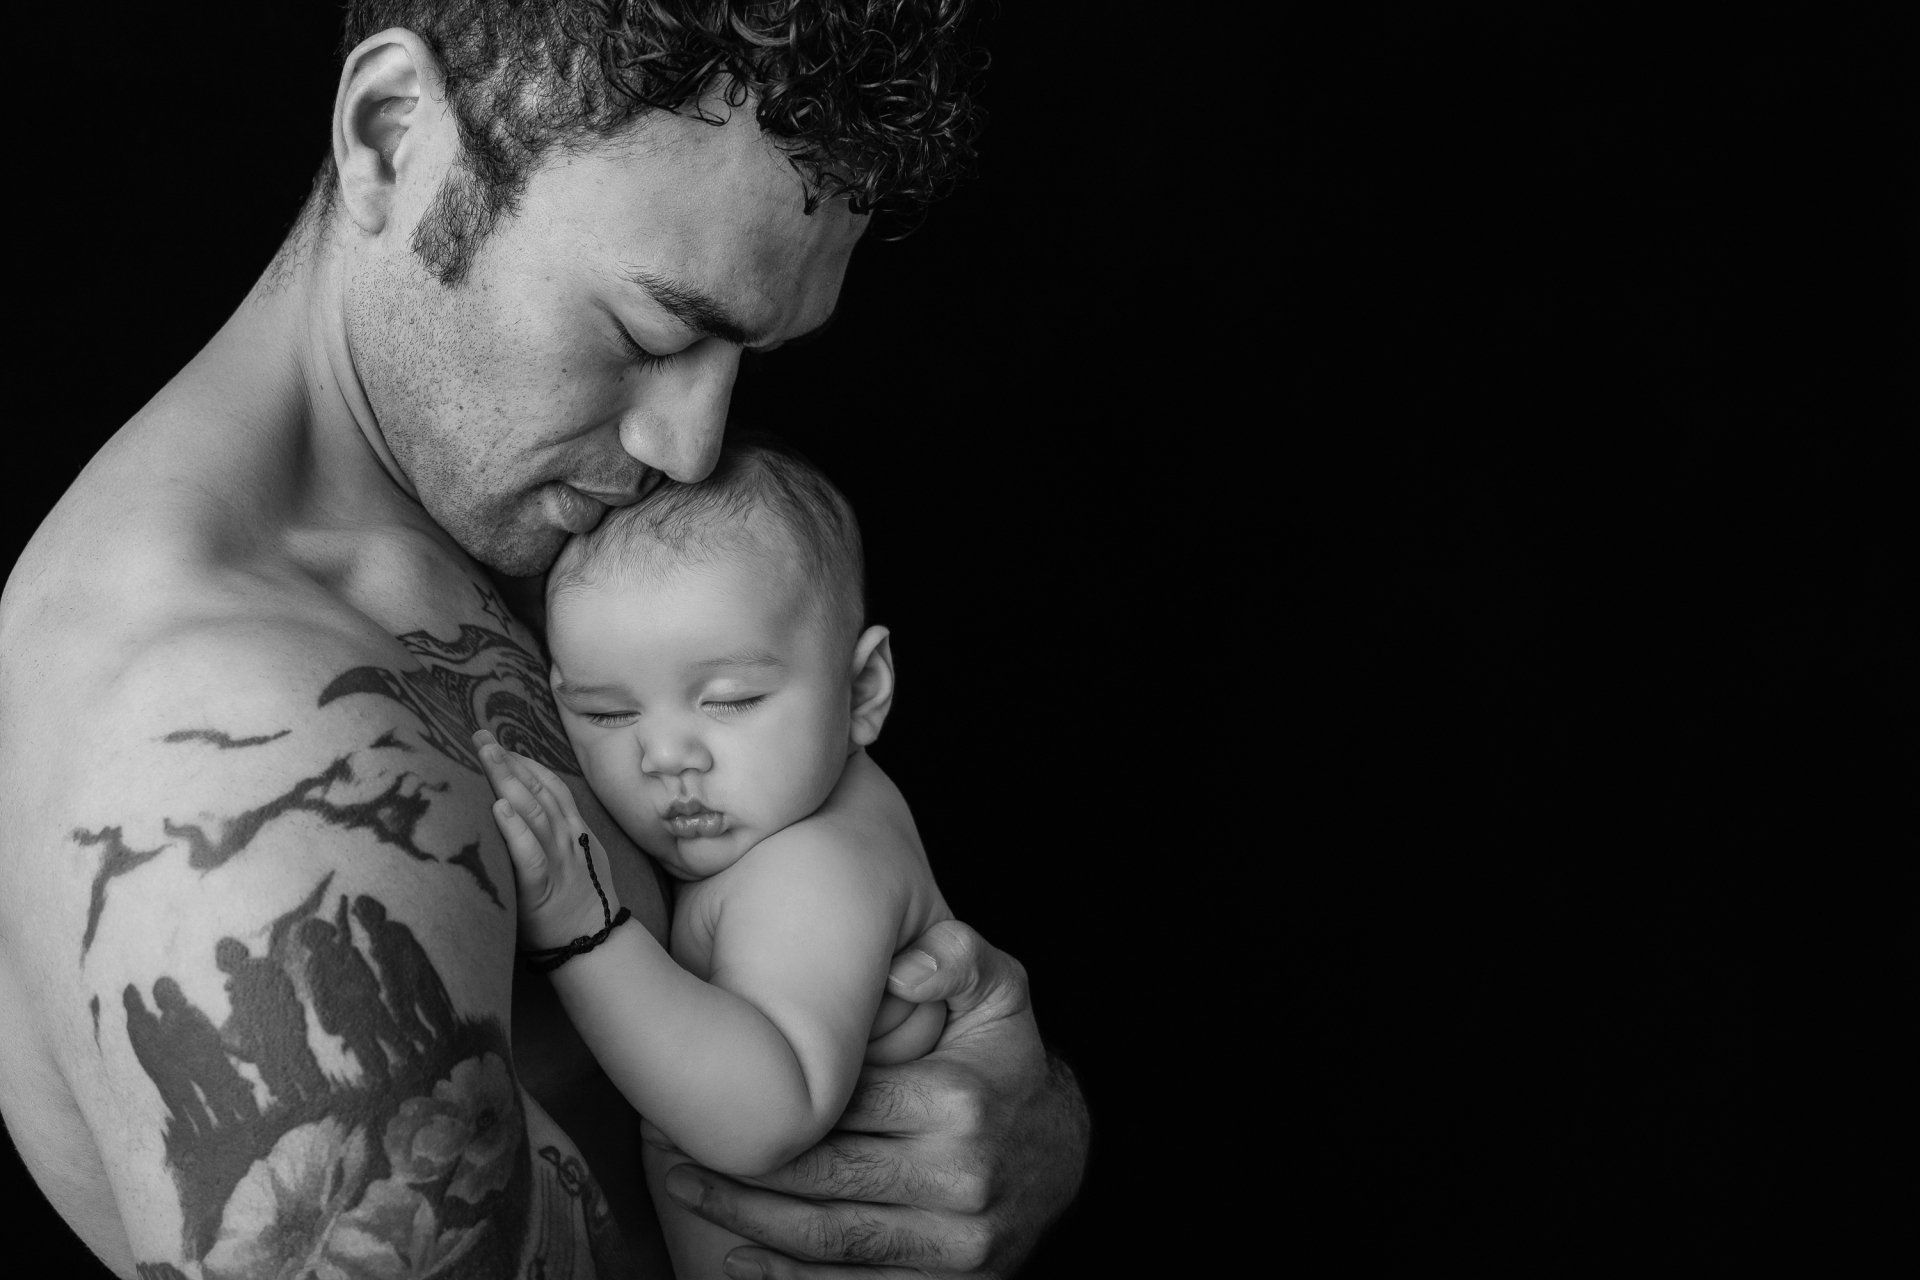 Black and white portrait of a young Tongan man holding his sleeping baby